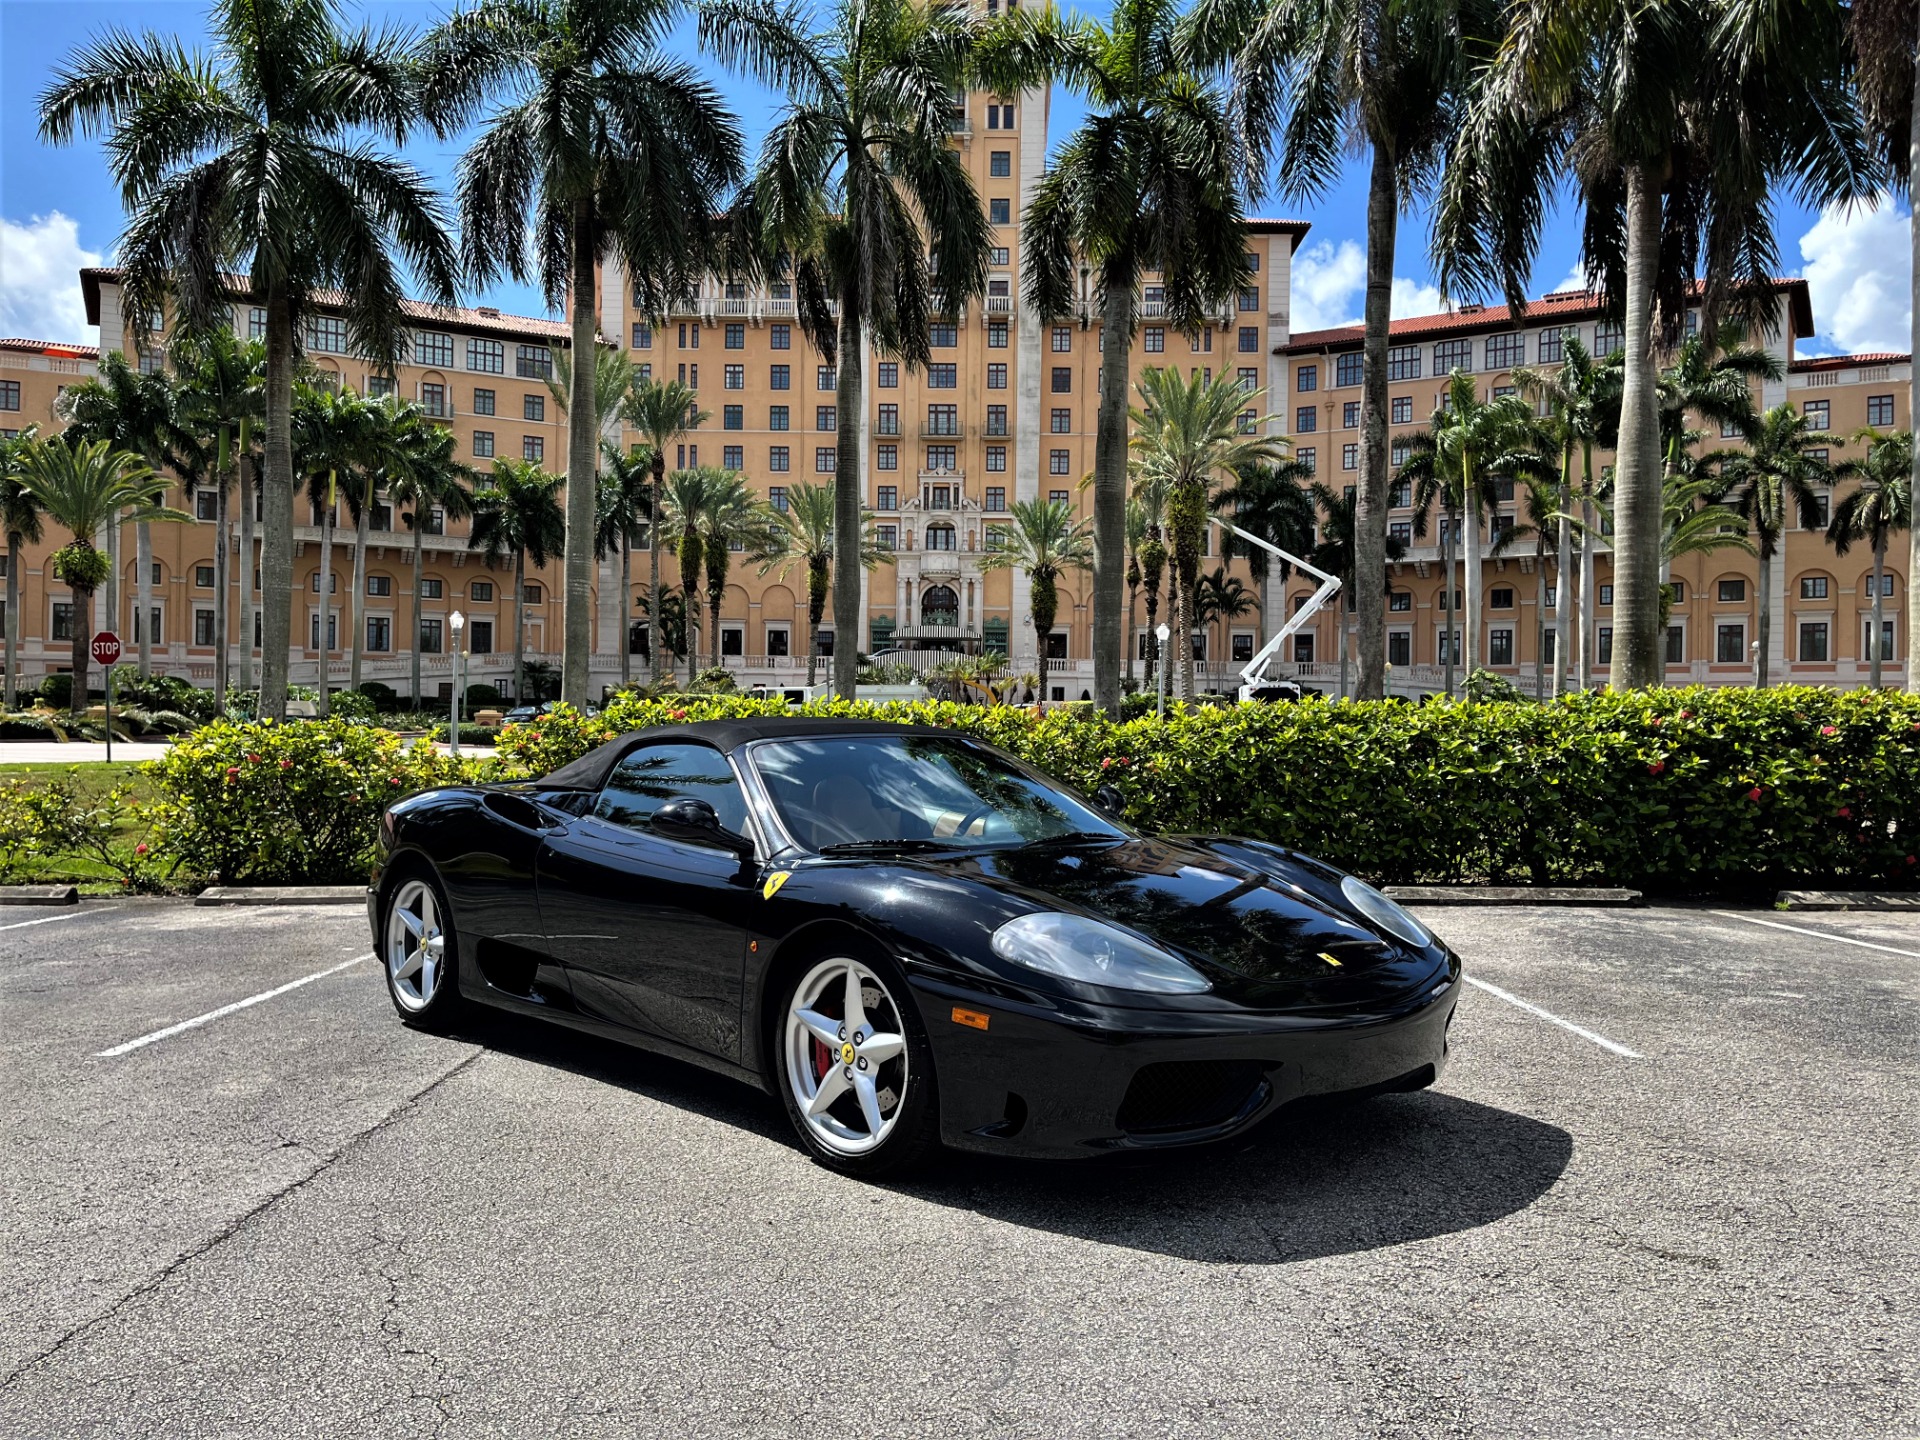 Used 2003 Ferrari 360 Spider for sale $74,850 at The Gables Sports Cars in Miami FL 33146 1